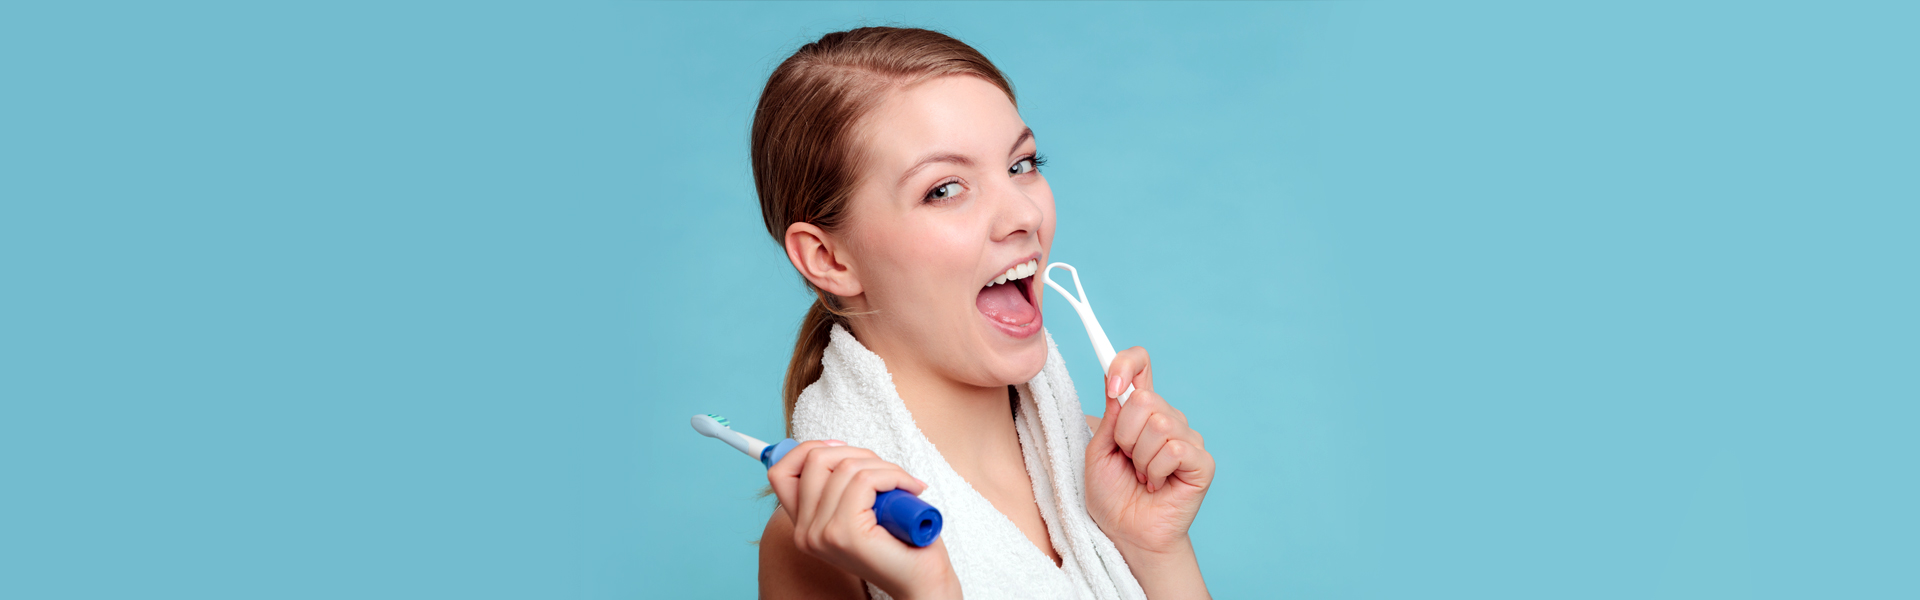 6 Tips for Caring for Your Oral Health